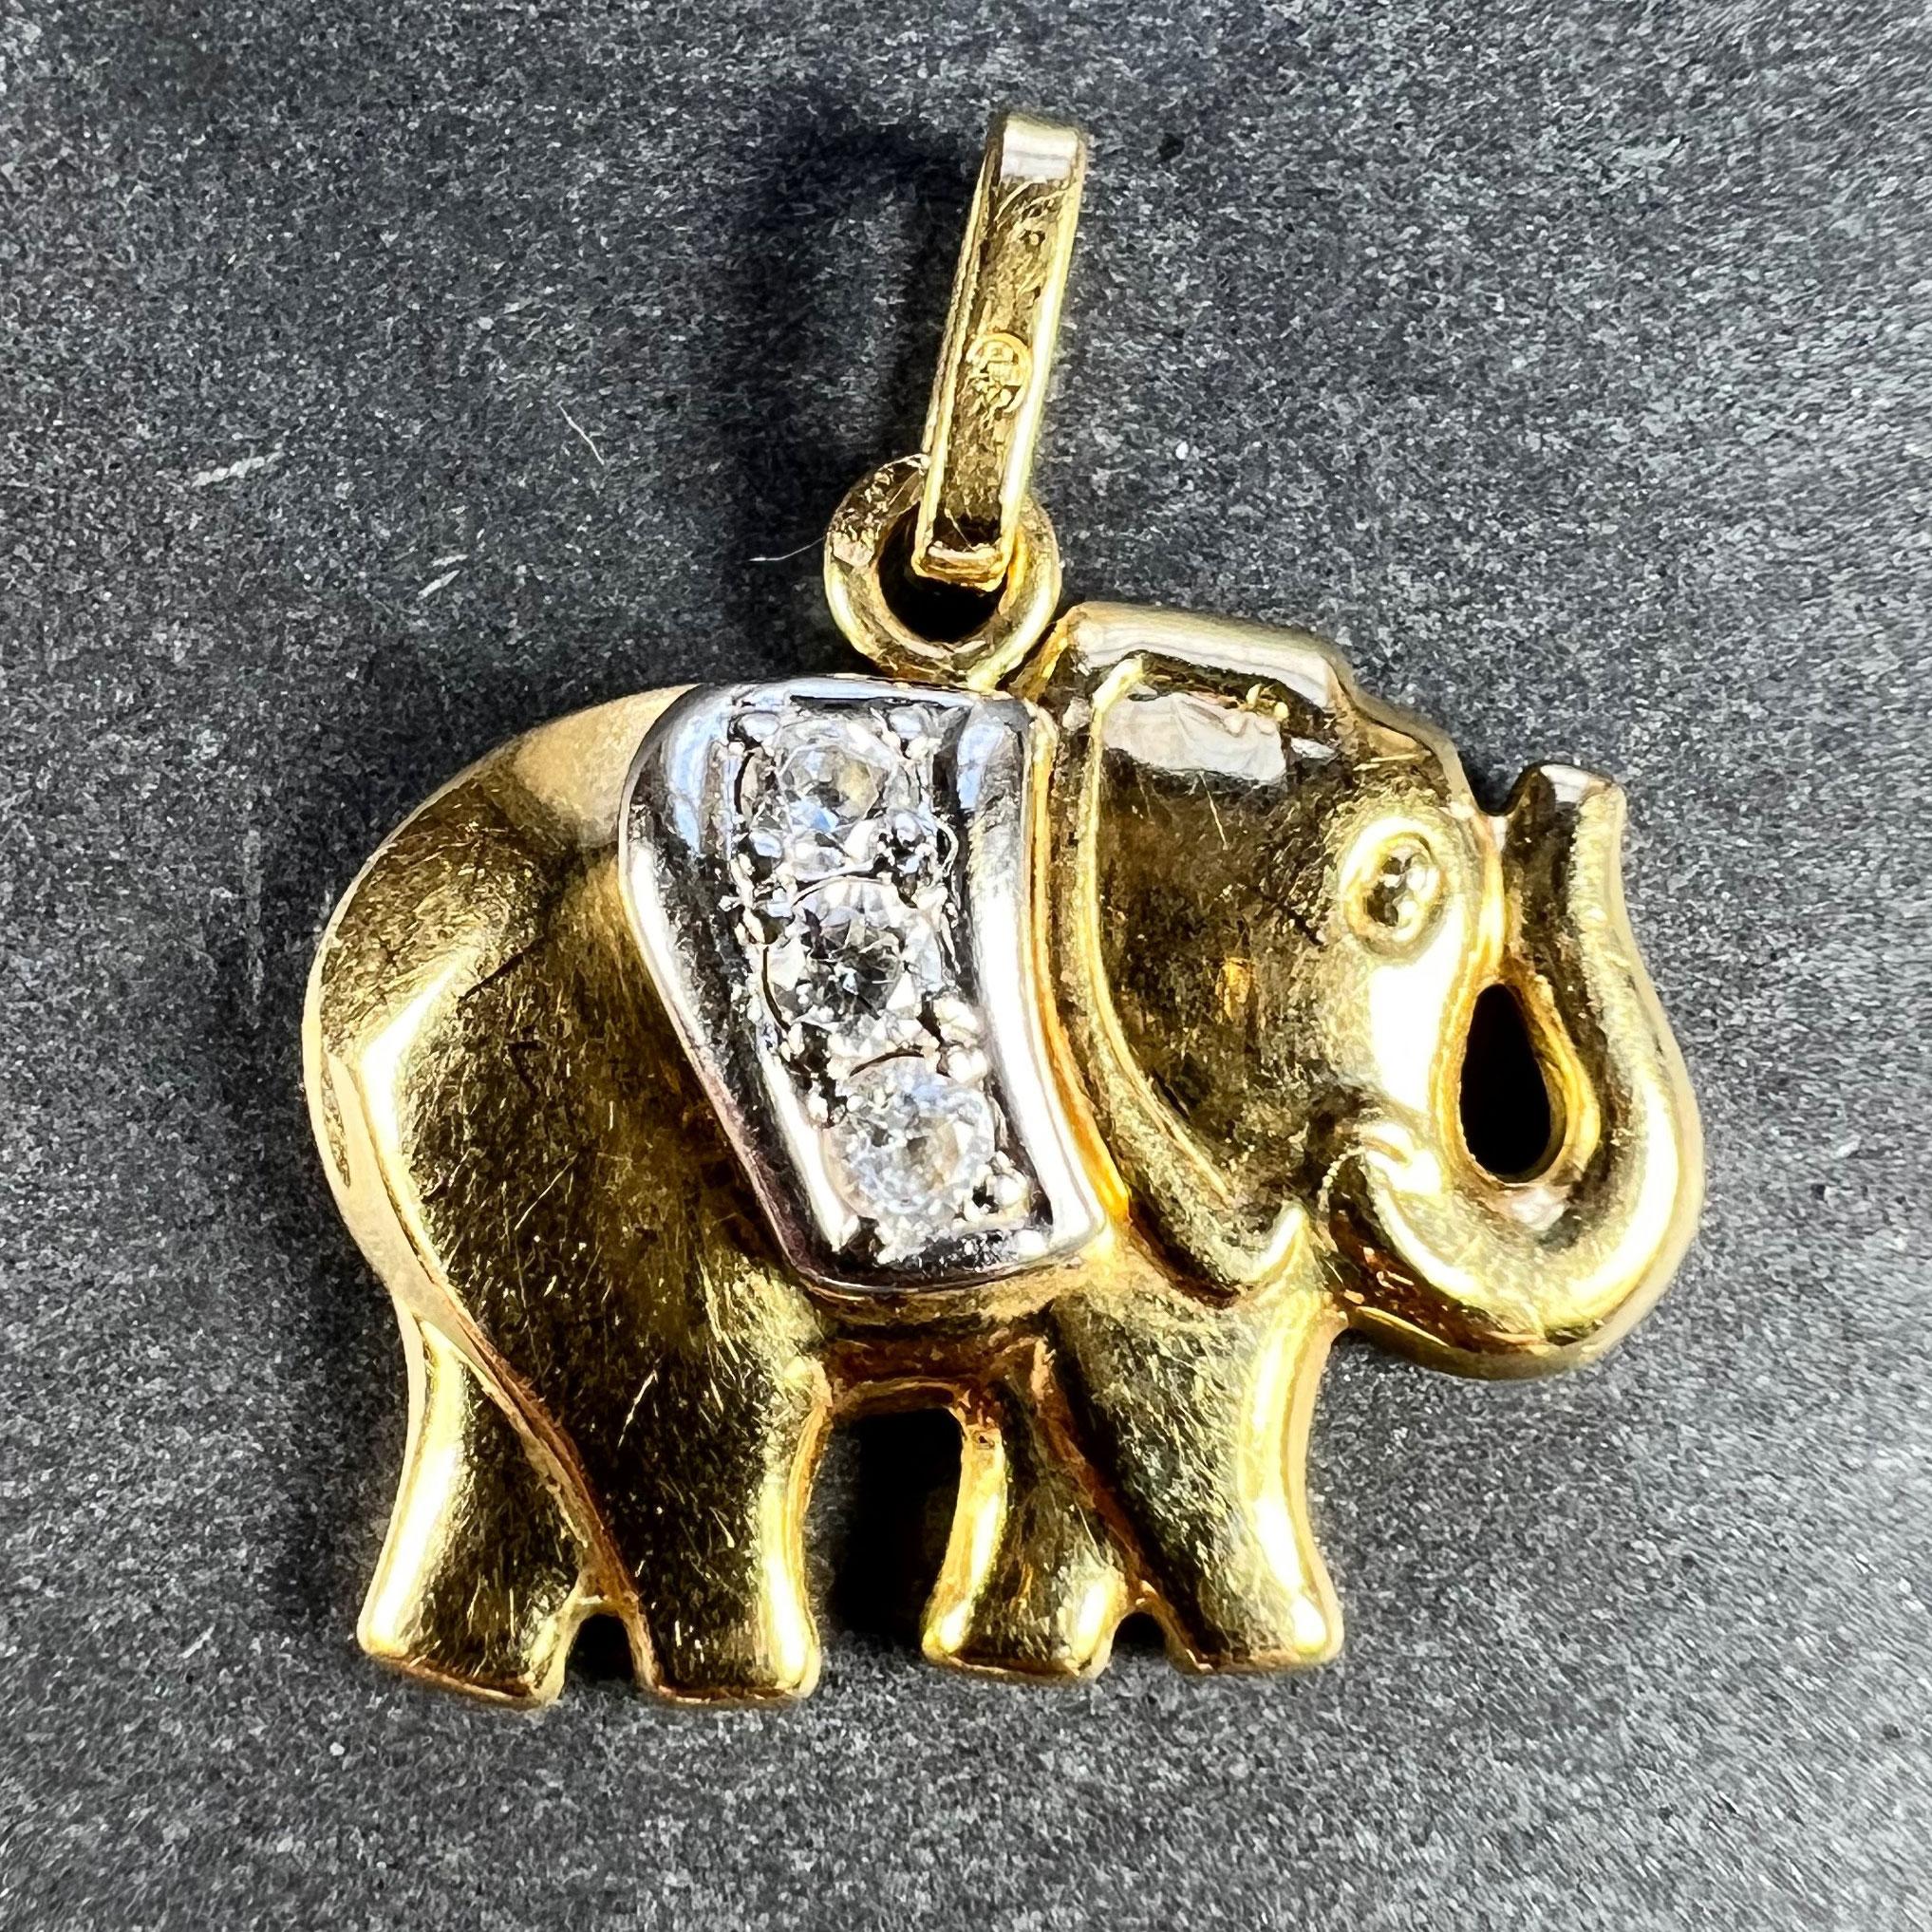 A French 18 karat (18K) yellow and white gold charm pendant designed as a lucky elephant with a diamond blanket over its back. Stamped with the eagle's head for 18 karat gold and French manufacture along with an unknown maker's mark.

Gem